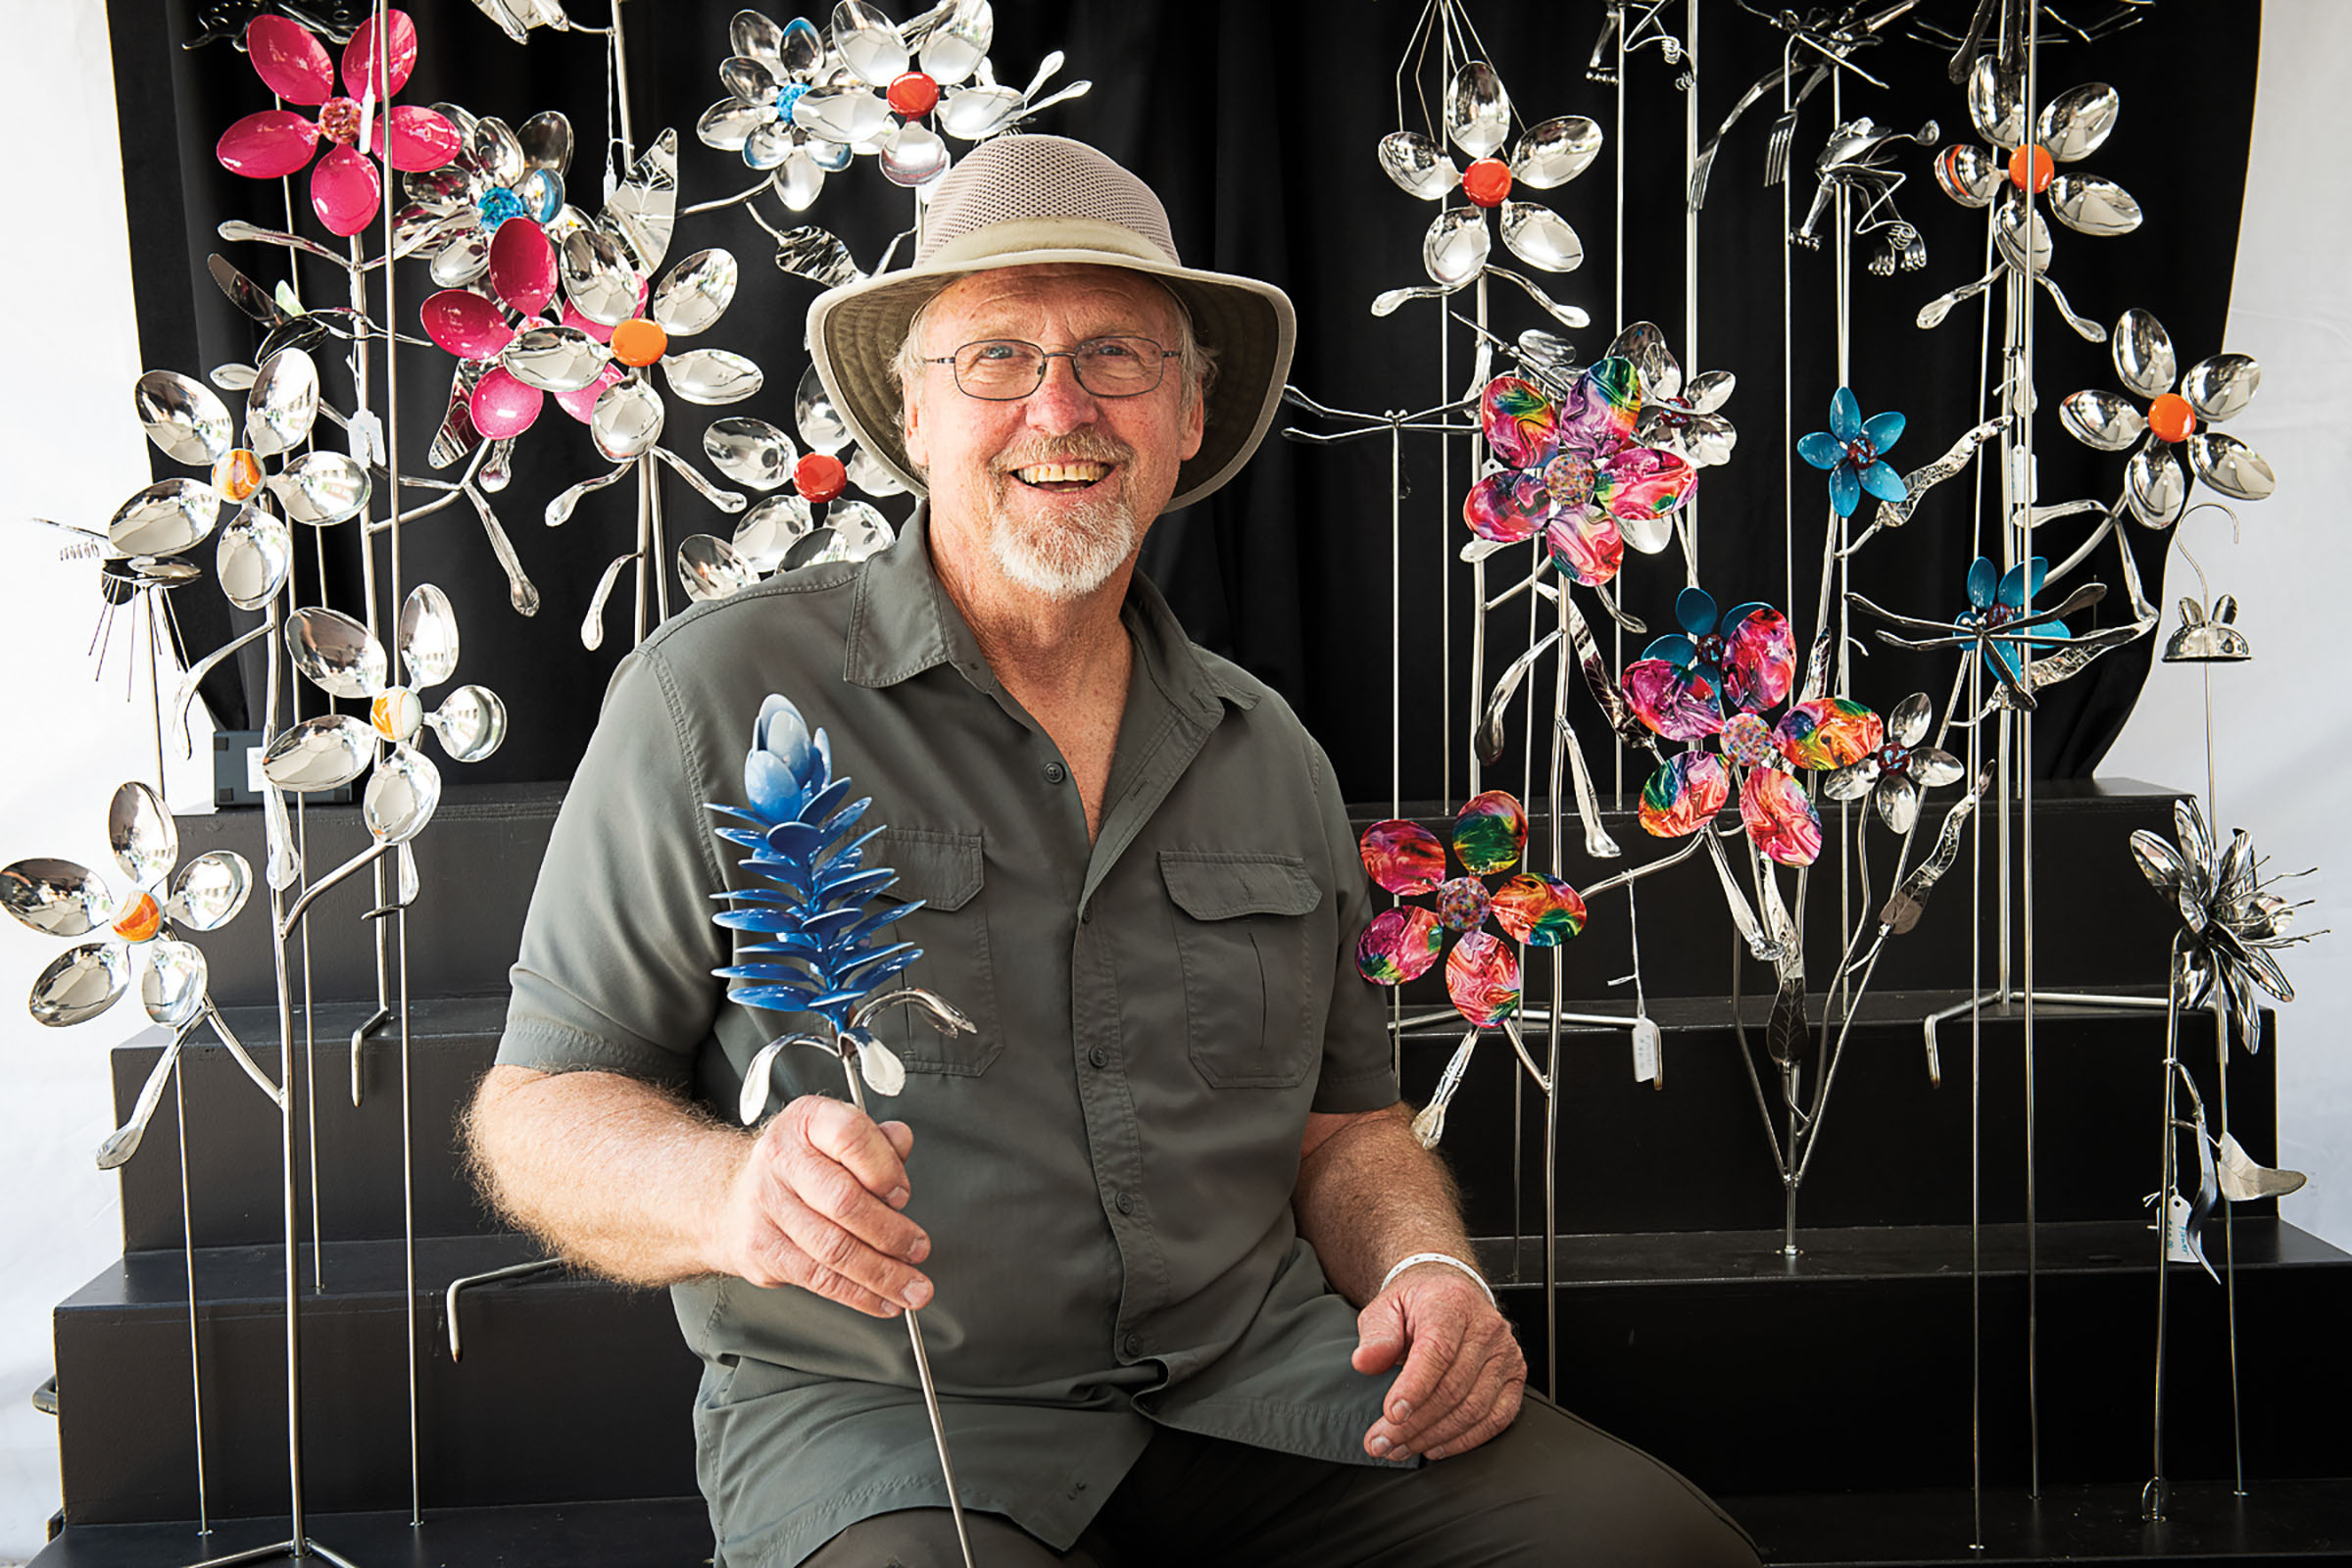 A man holds a metal bluebonnet in front of an array of other metal flowers on a dark background